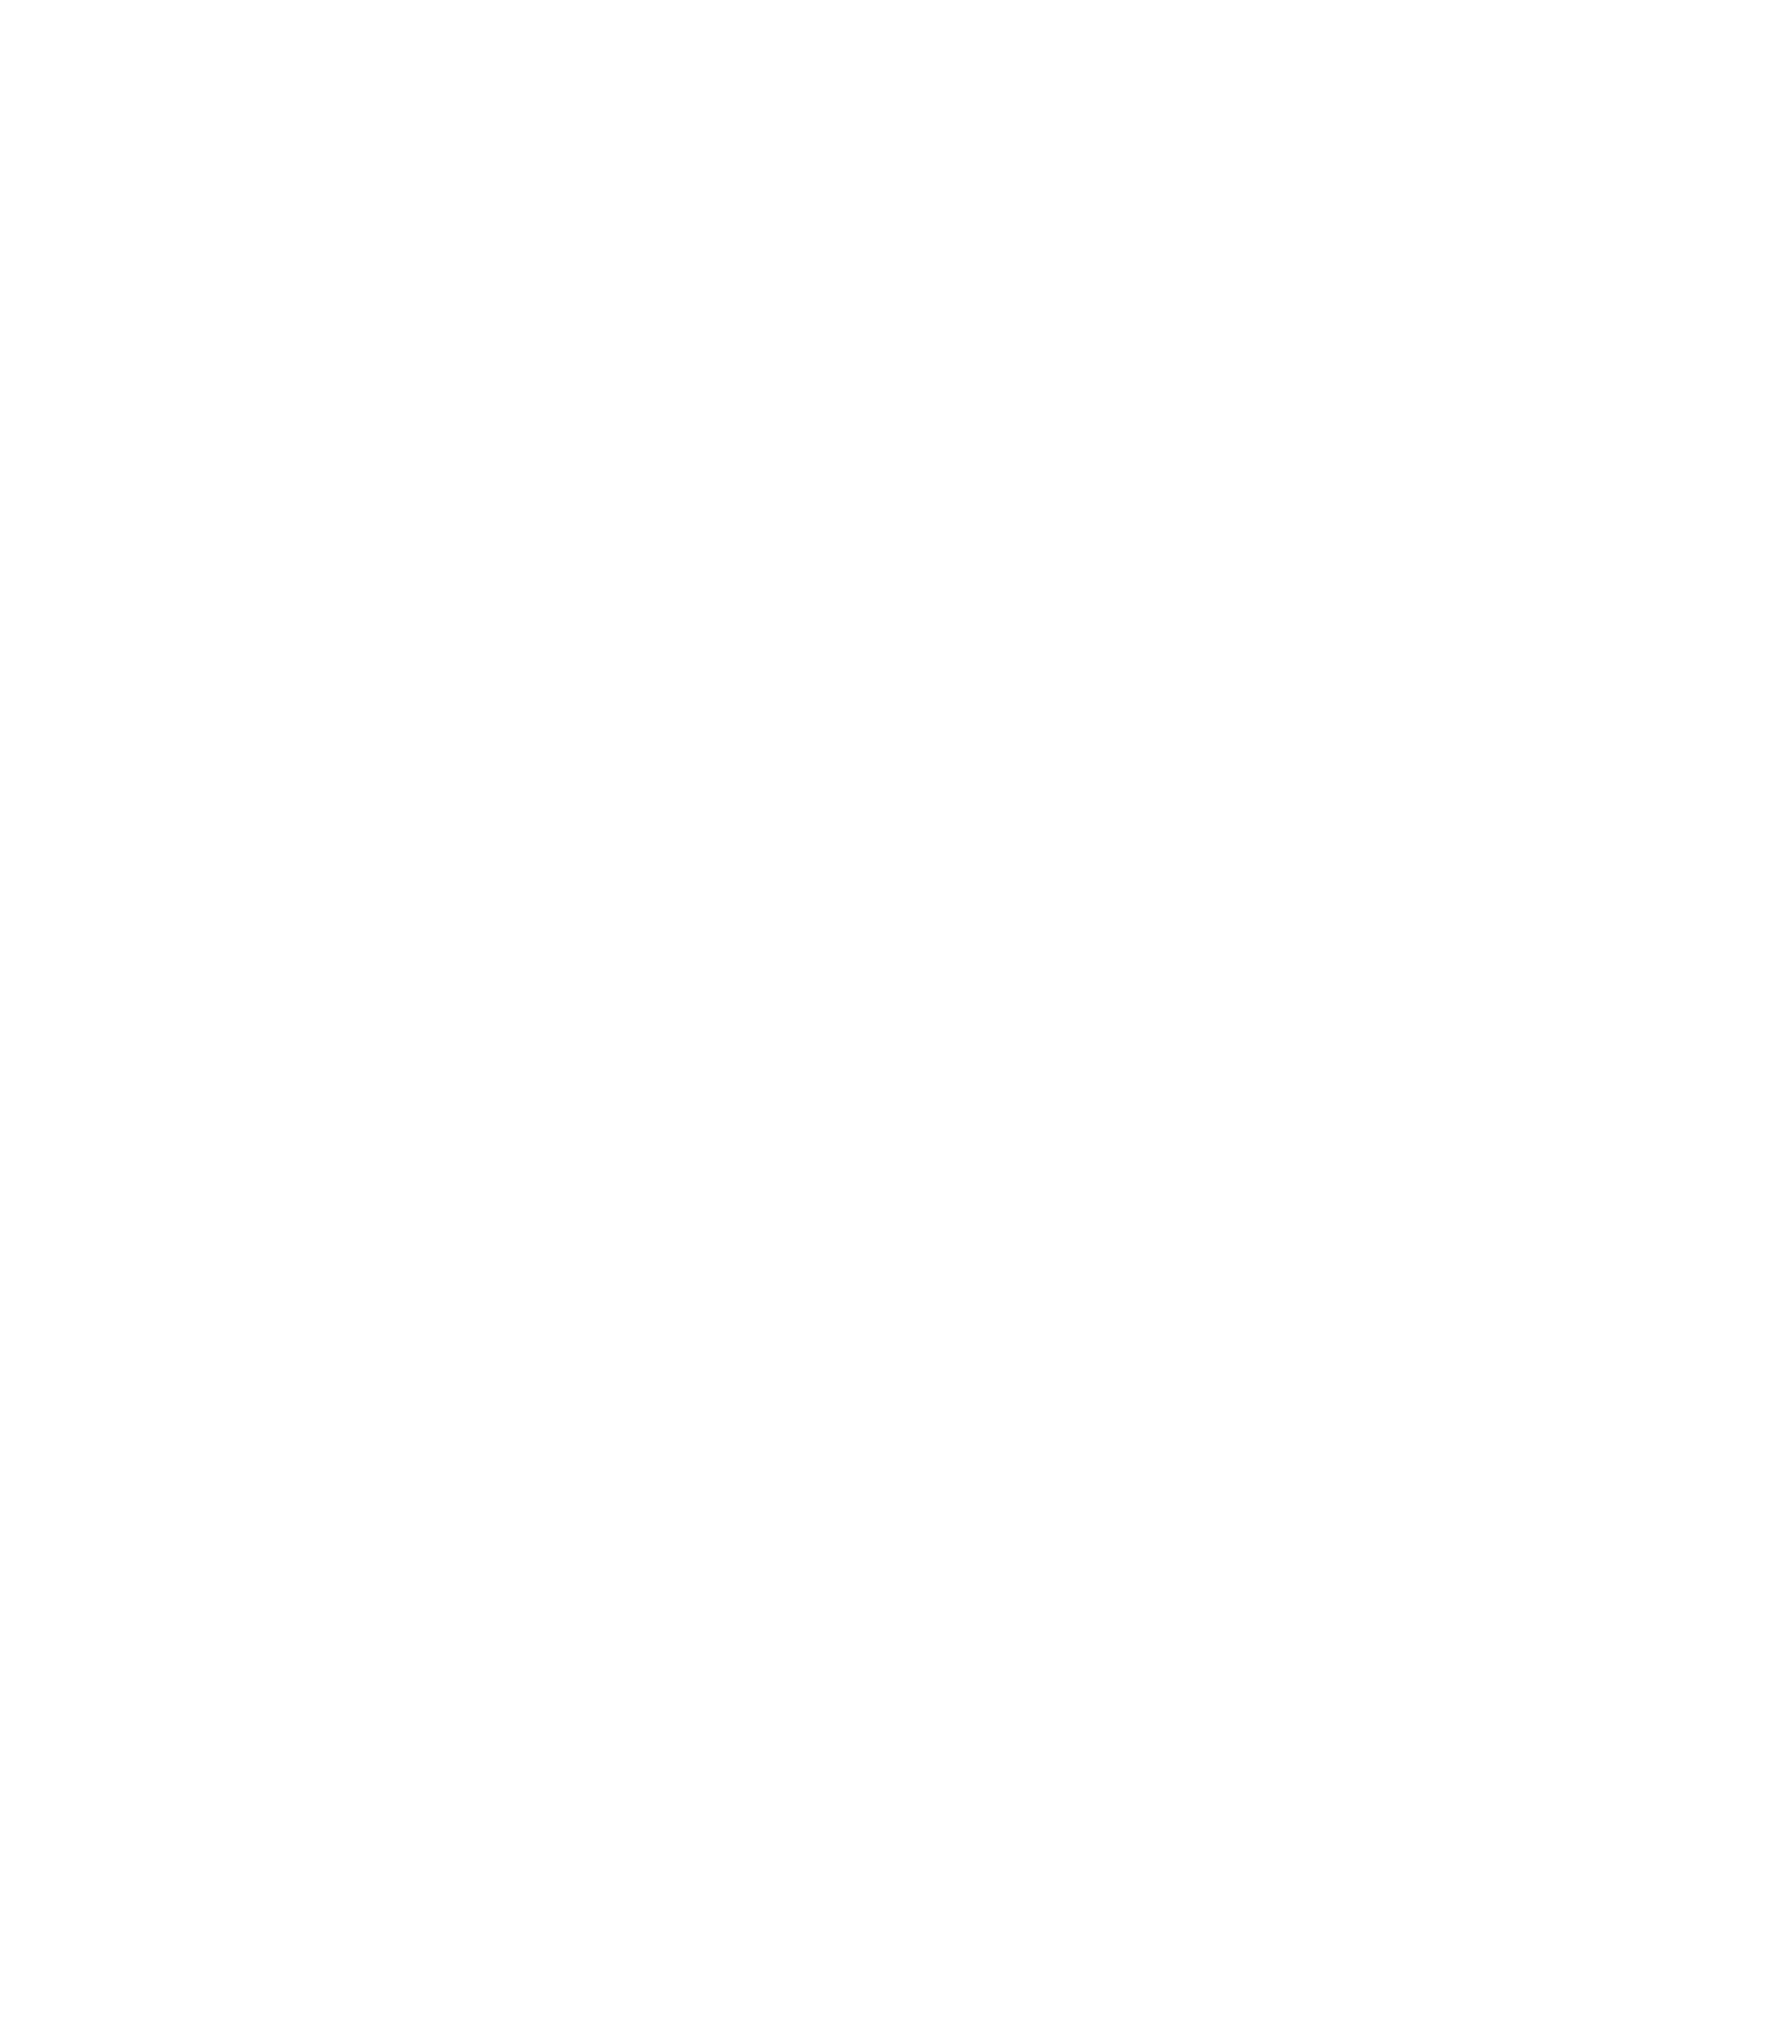 Dimensions drawing of TS600